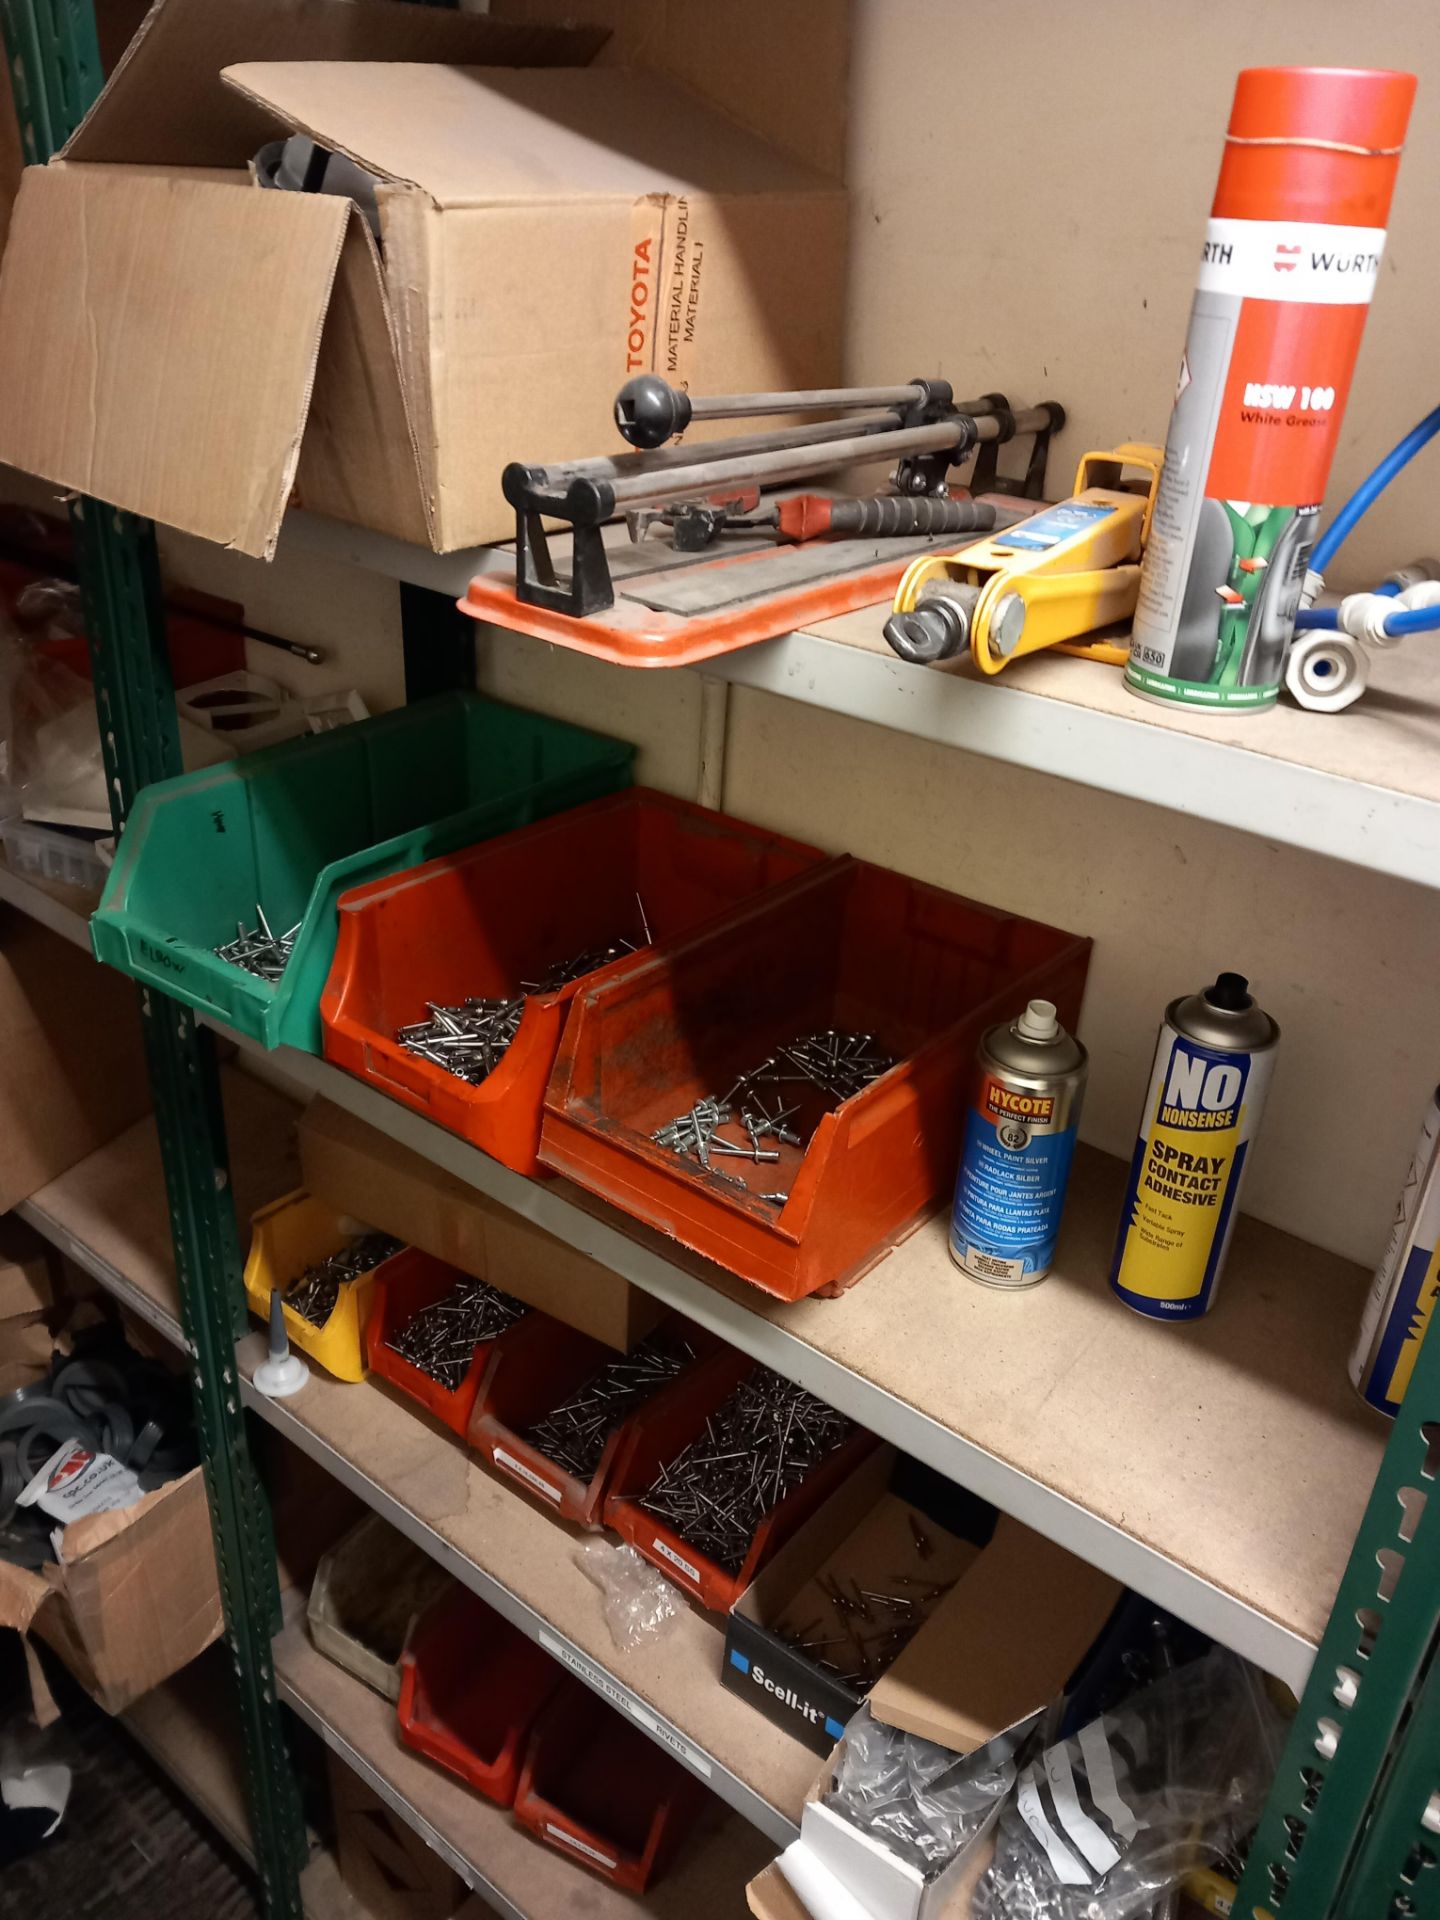 Content of store room to include various fittings, components, adhesives, sealants, electrical - Image 15 of 15